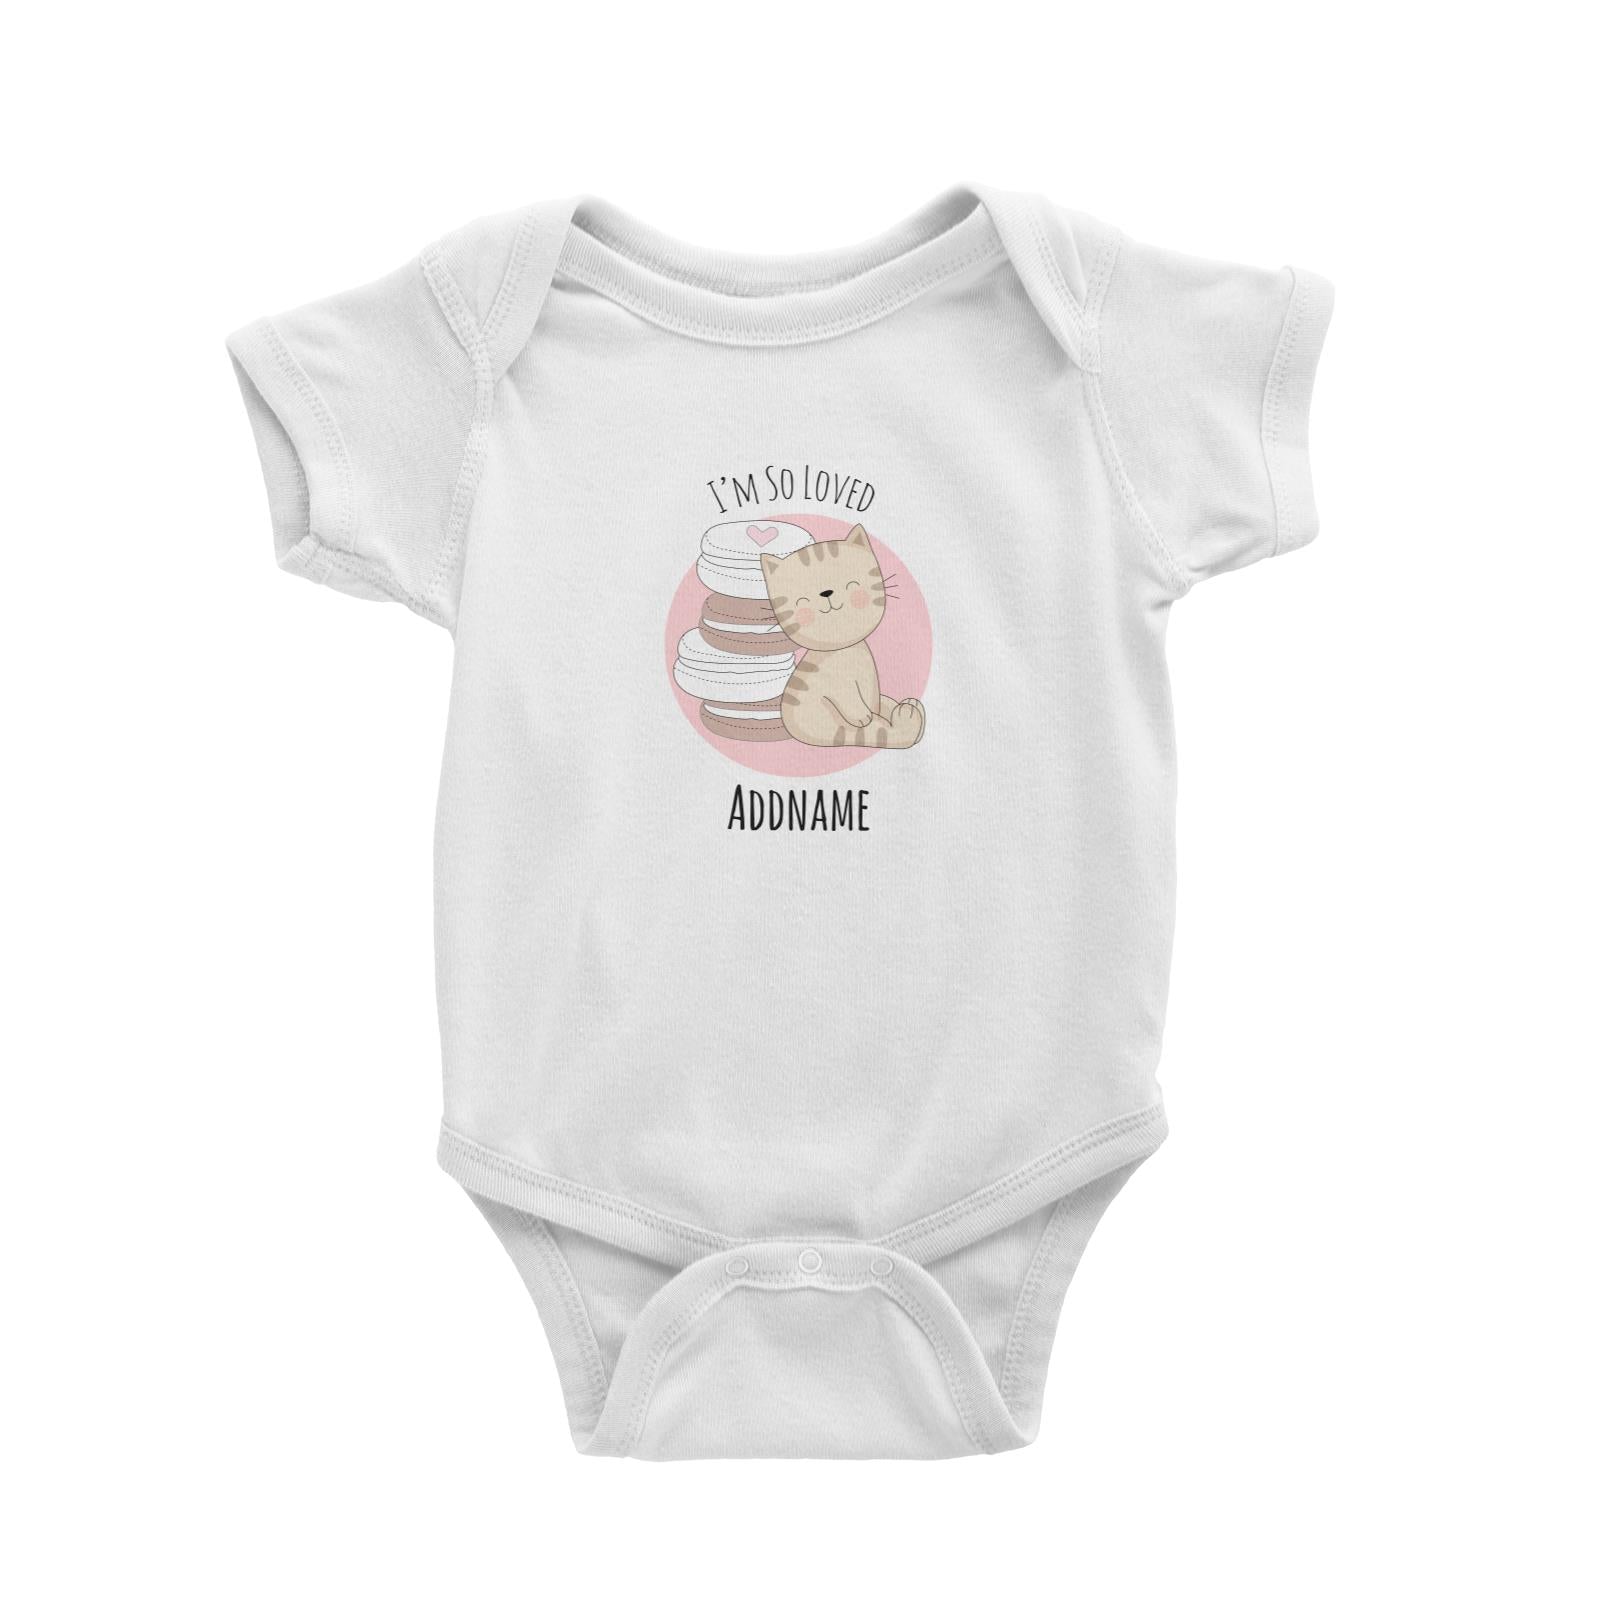 Sweet Animals Sketches Cat Macaroons I'm So Loved Addname Baby Romper